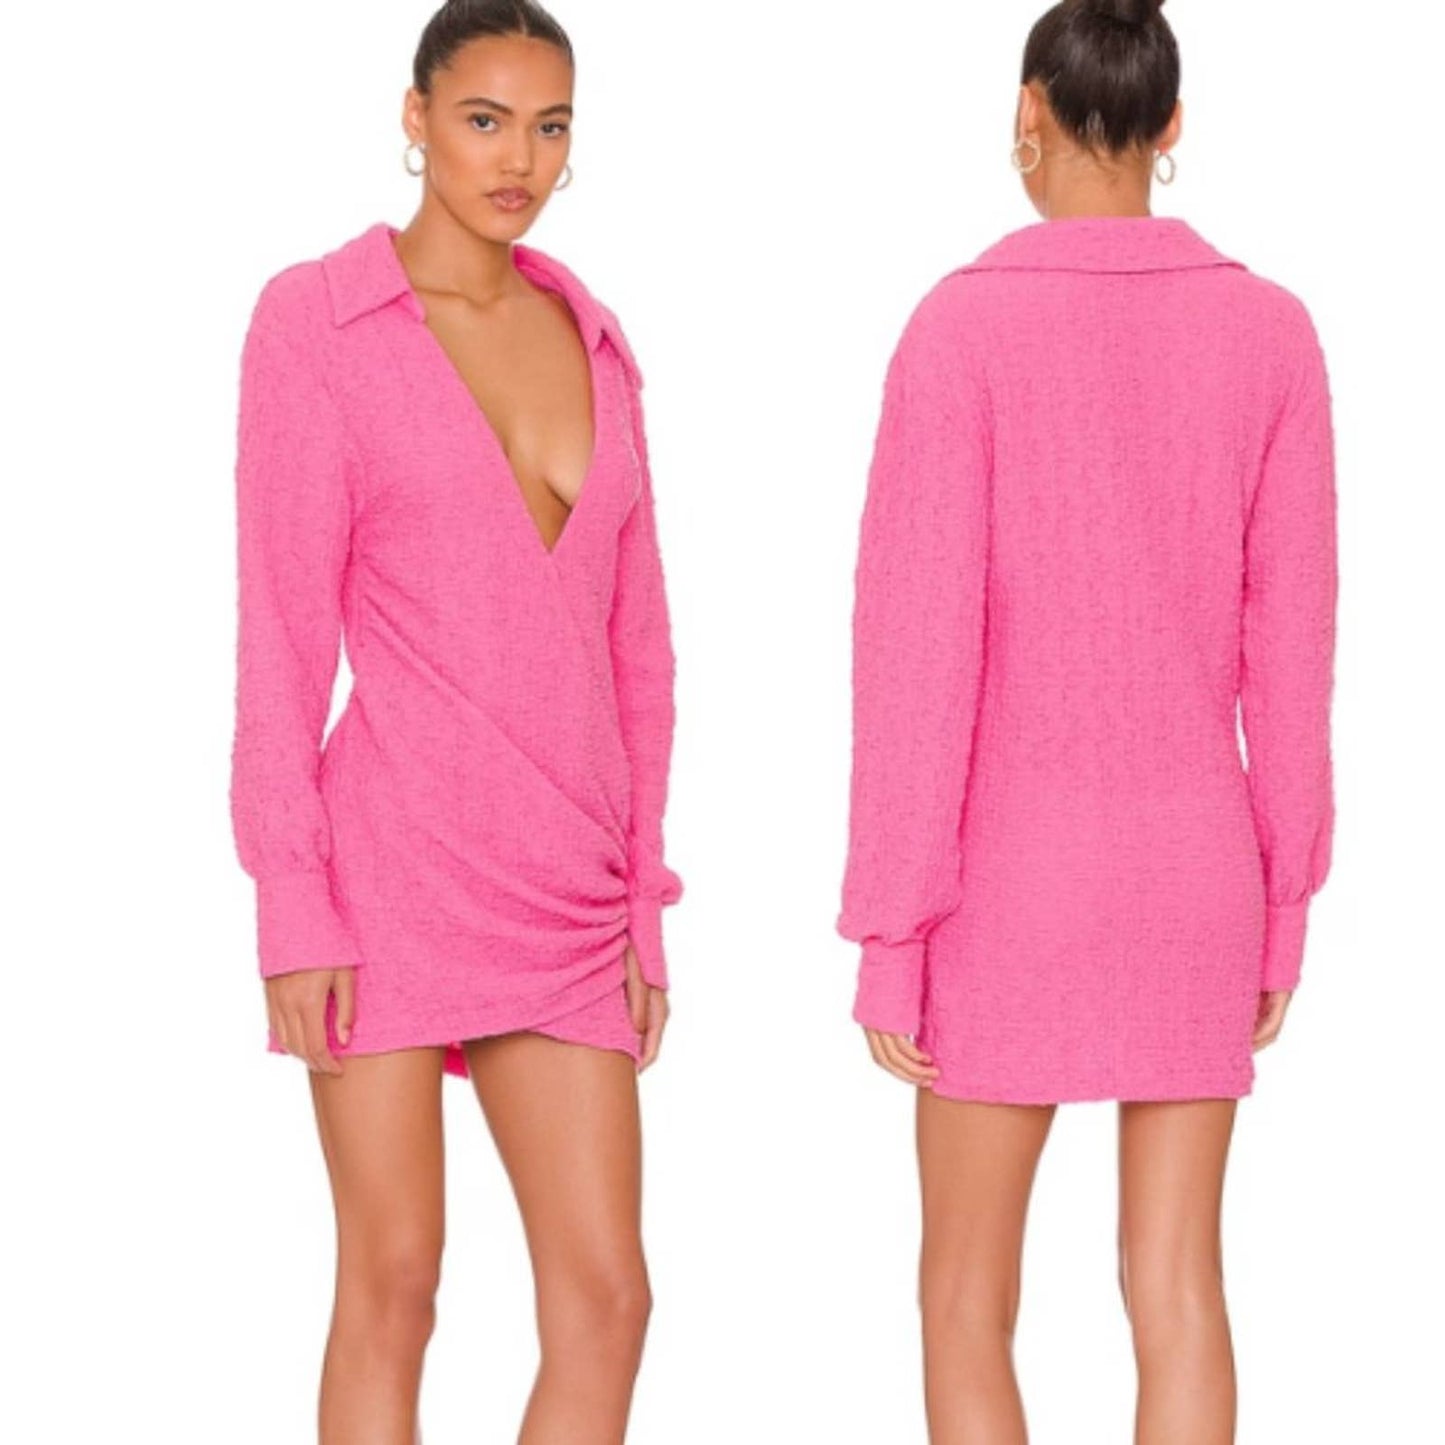 h:ours Dede Mini Dress in Pink in Hot Pink NWT Size XS